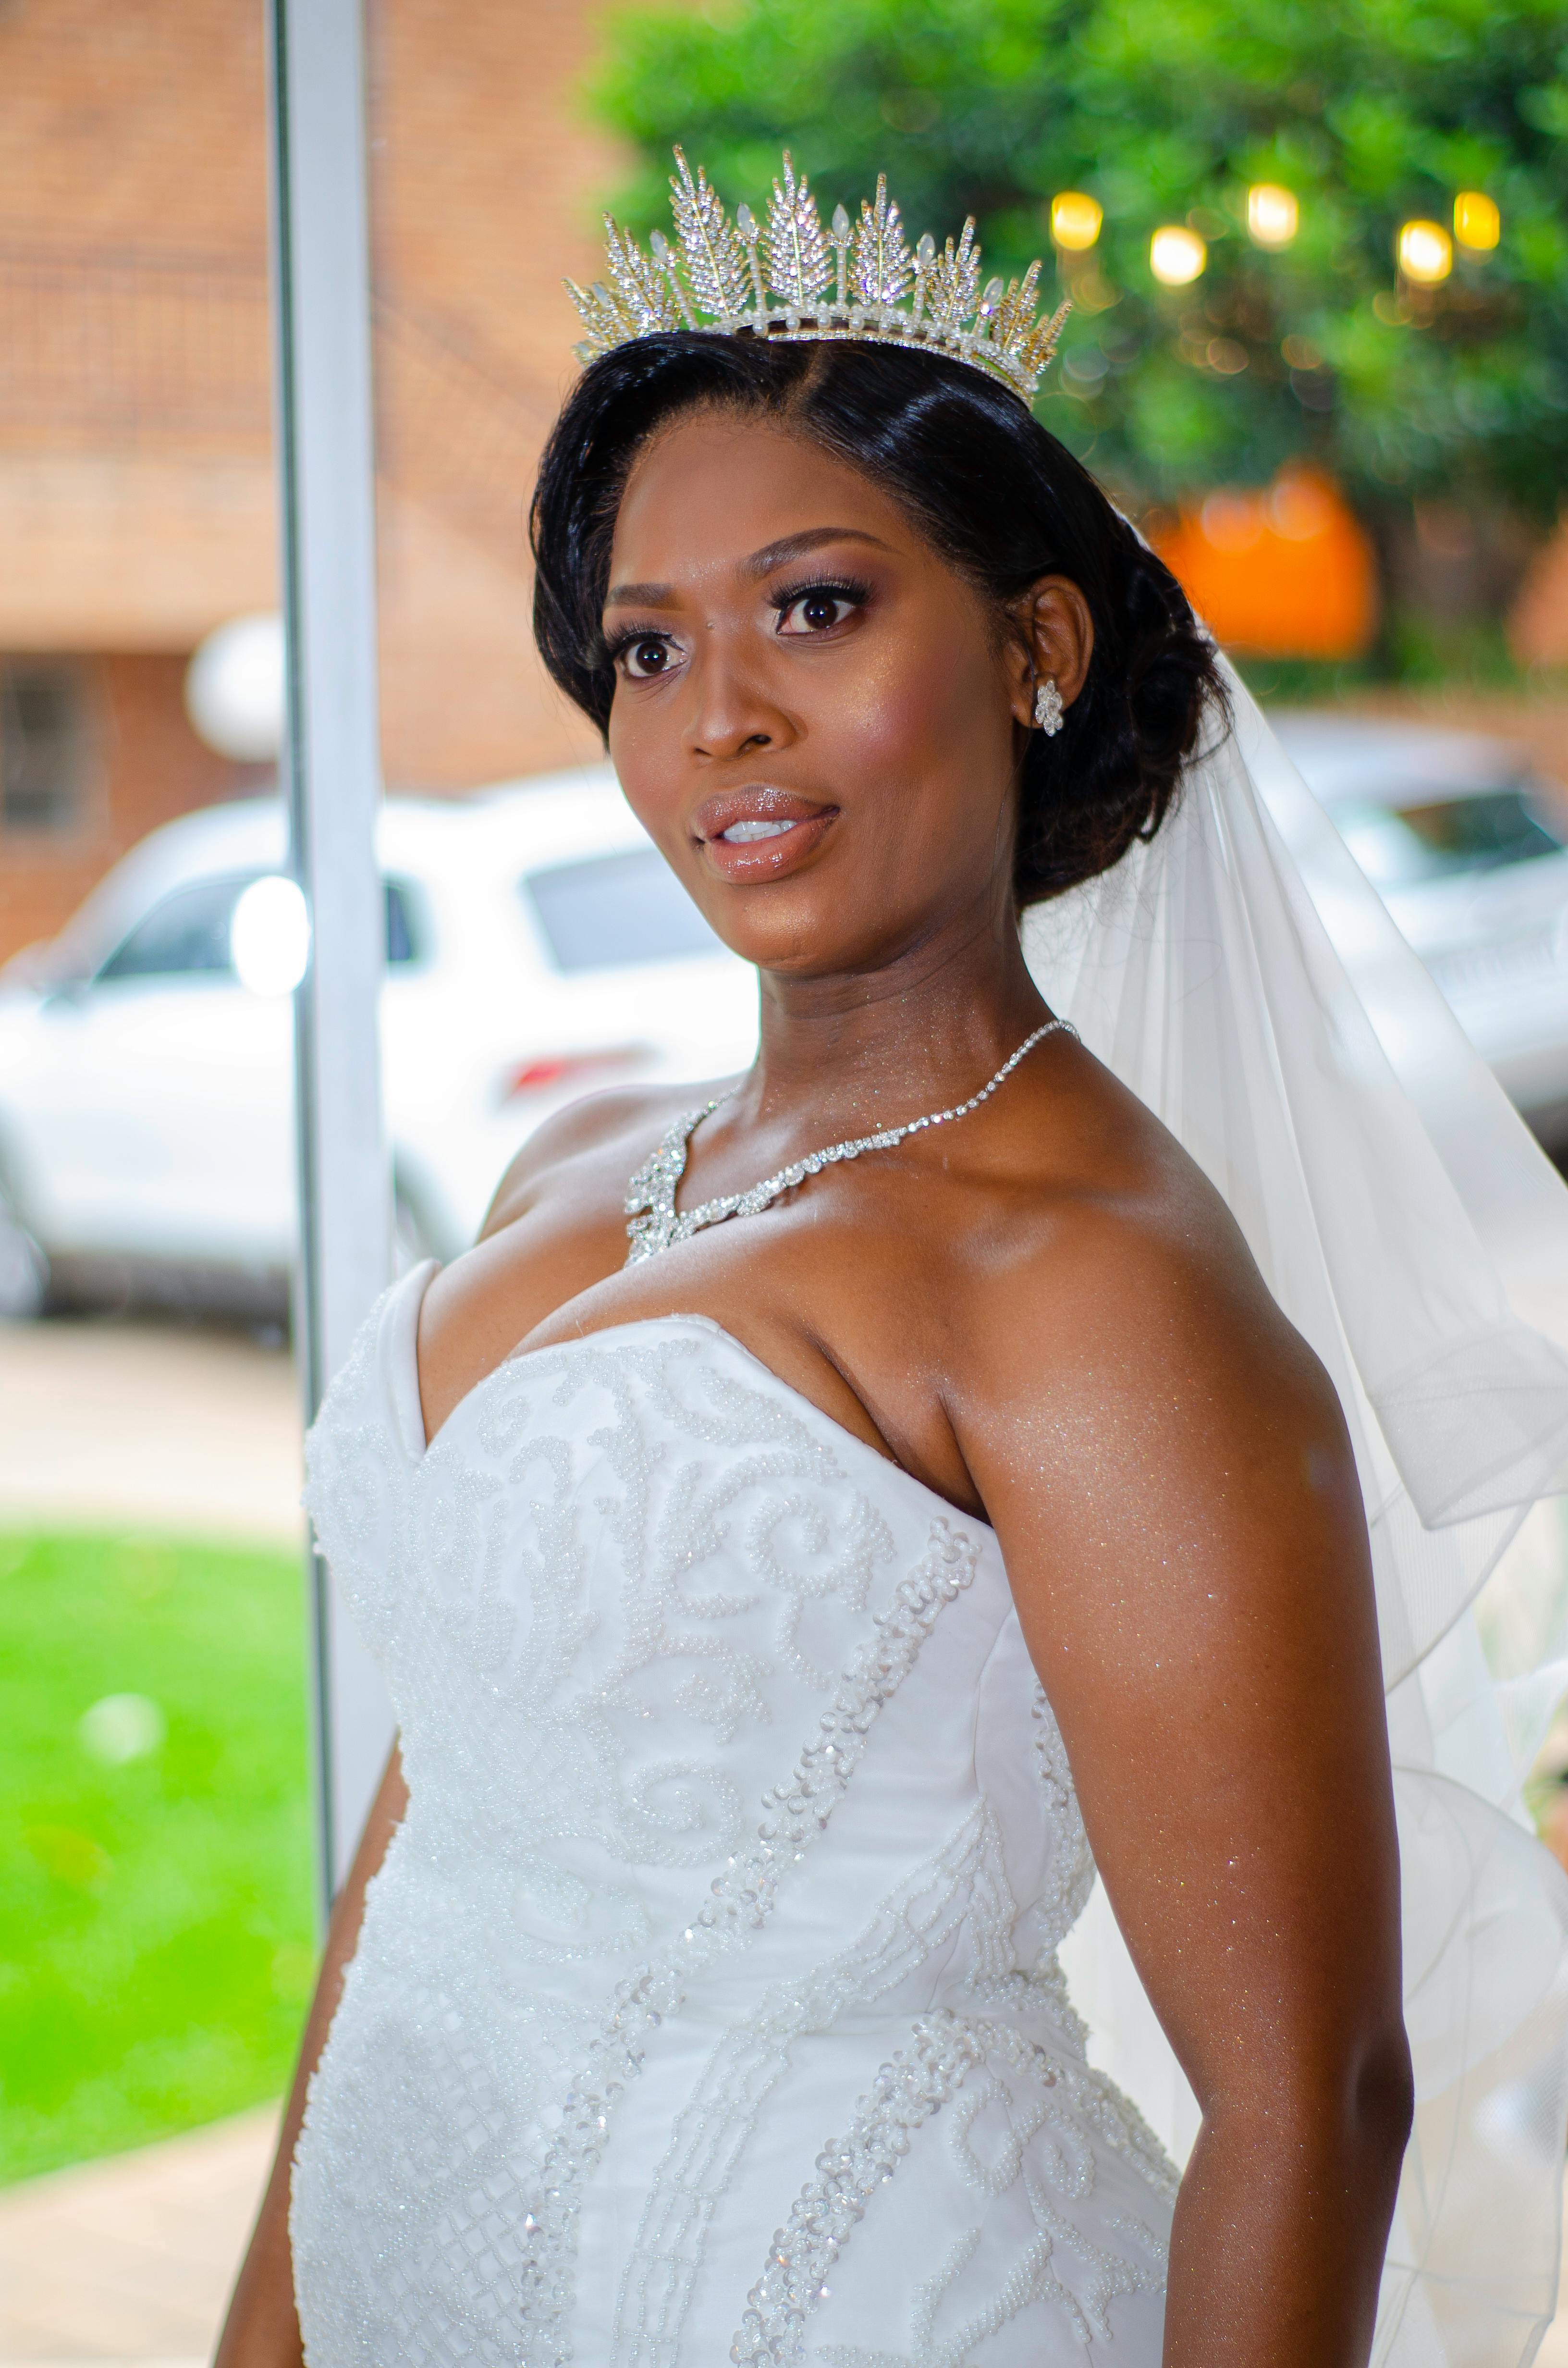 26 Beautiful Hairstyles For The African American Bride - | Natural wedding  hairstyles, Black brides hairstyles, Natural hair wedding